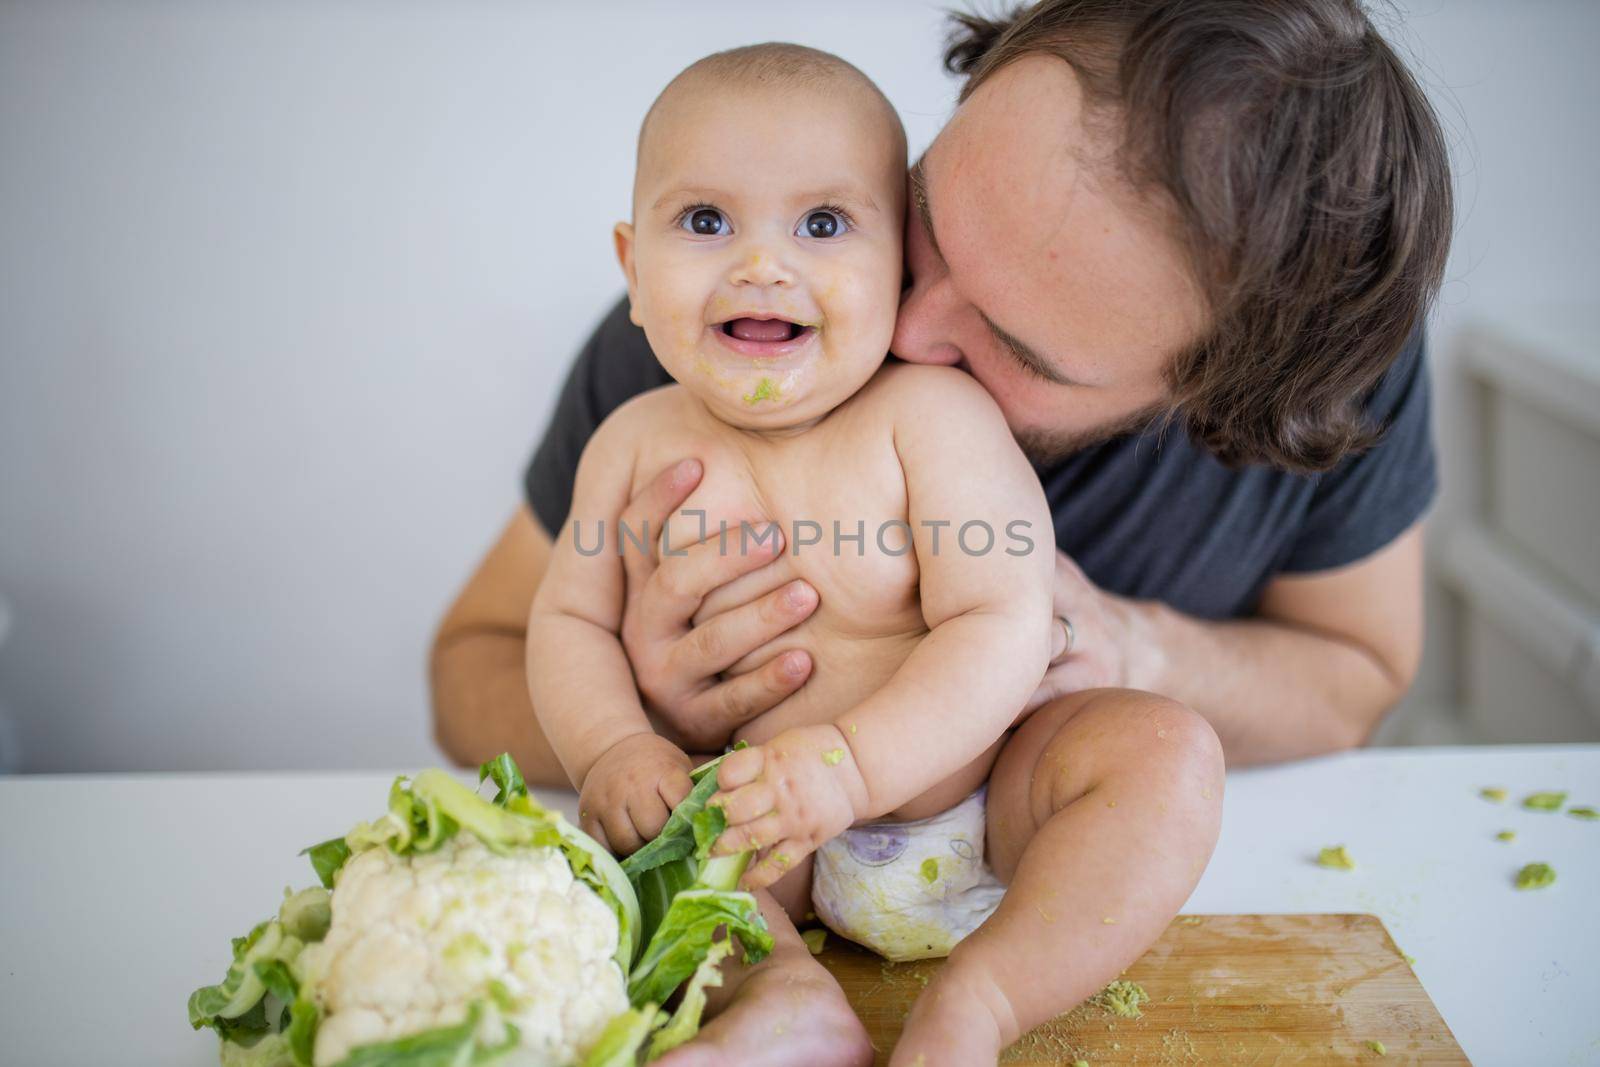 Father lovingly holding and kissing his happy baby daughter above table. Adorable baby on wooden board smiling and holding cauliflower. Babies interacting with food